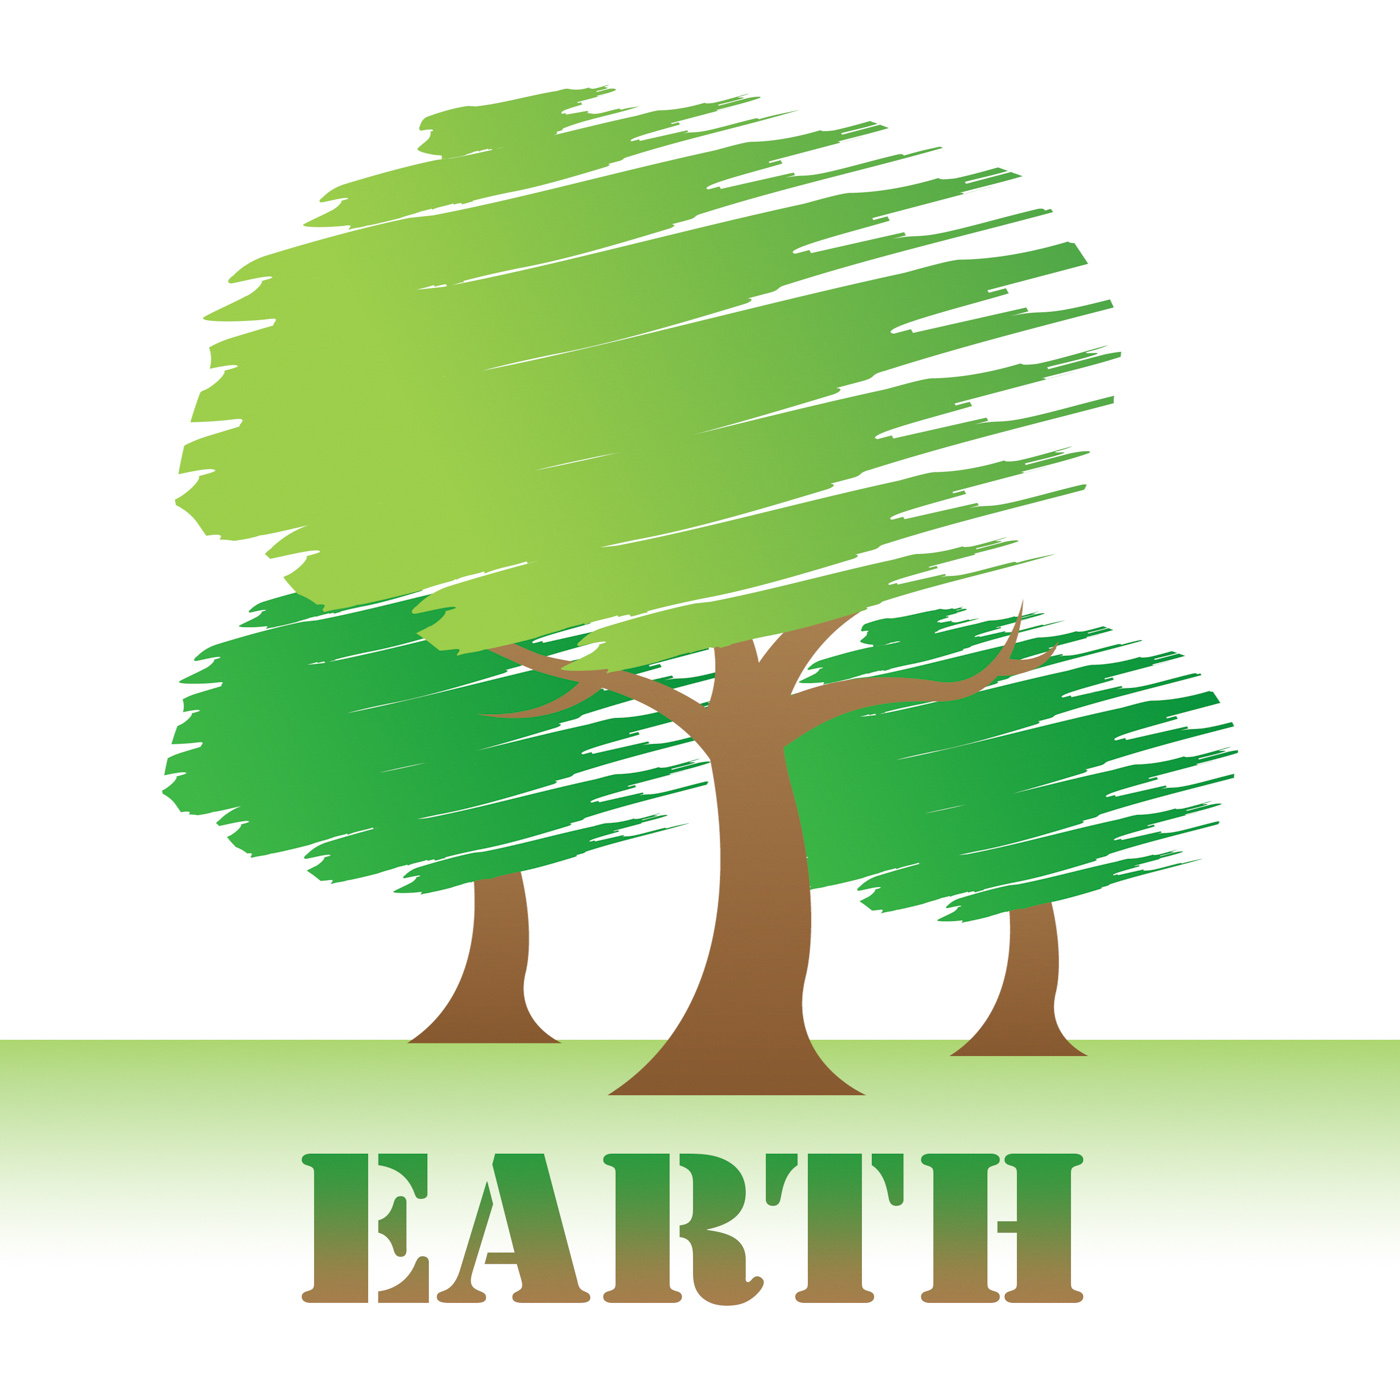 Earth trees represents environment forest and nature photo